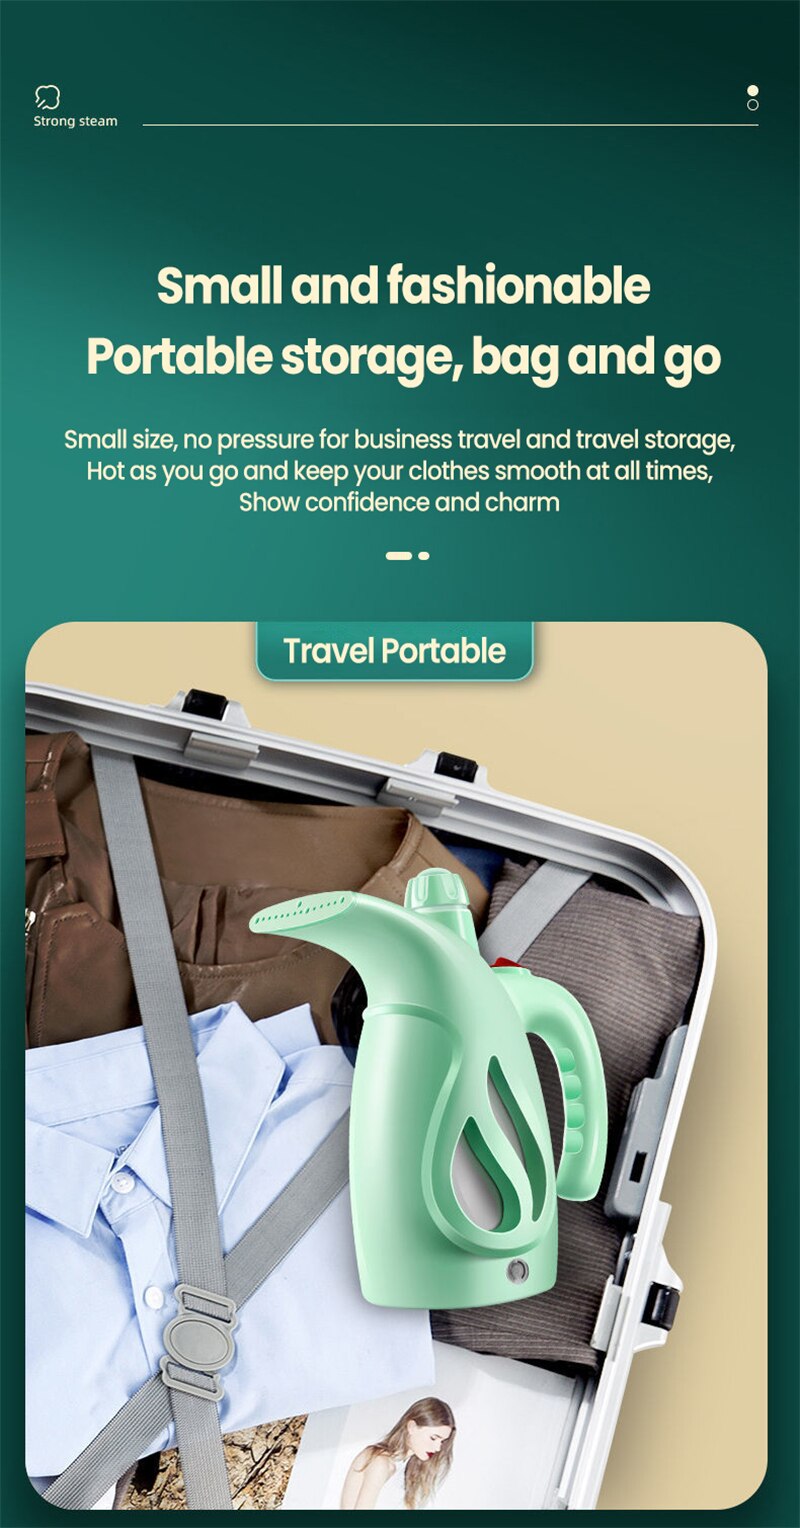 Clothes Steamer Portable Handheld Iron Vertical Garment Steamers Steam Machine Ironing Home Appliances for Home Travel